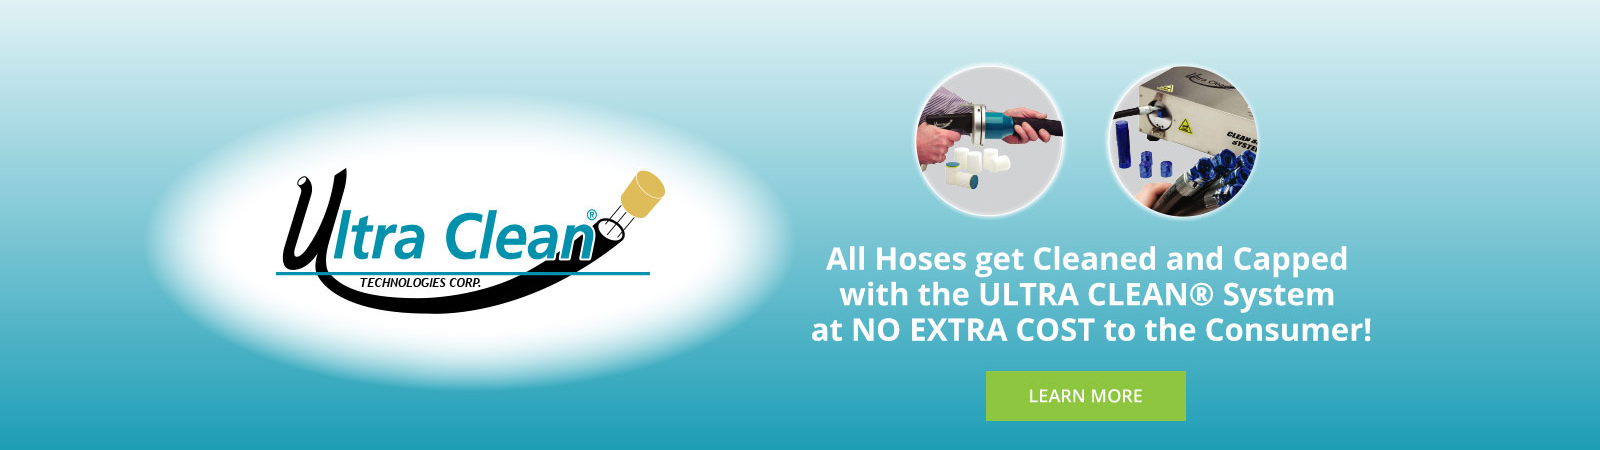 Ultra Clean Host Cleaning & Capping System